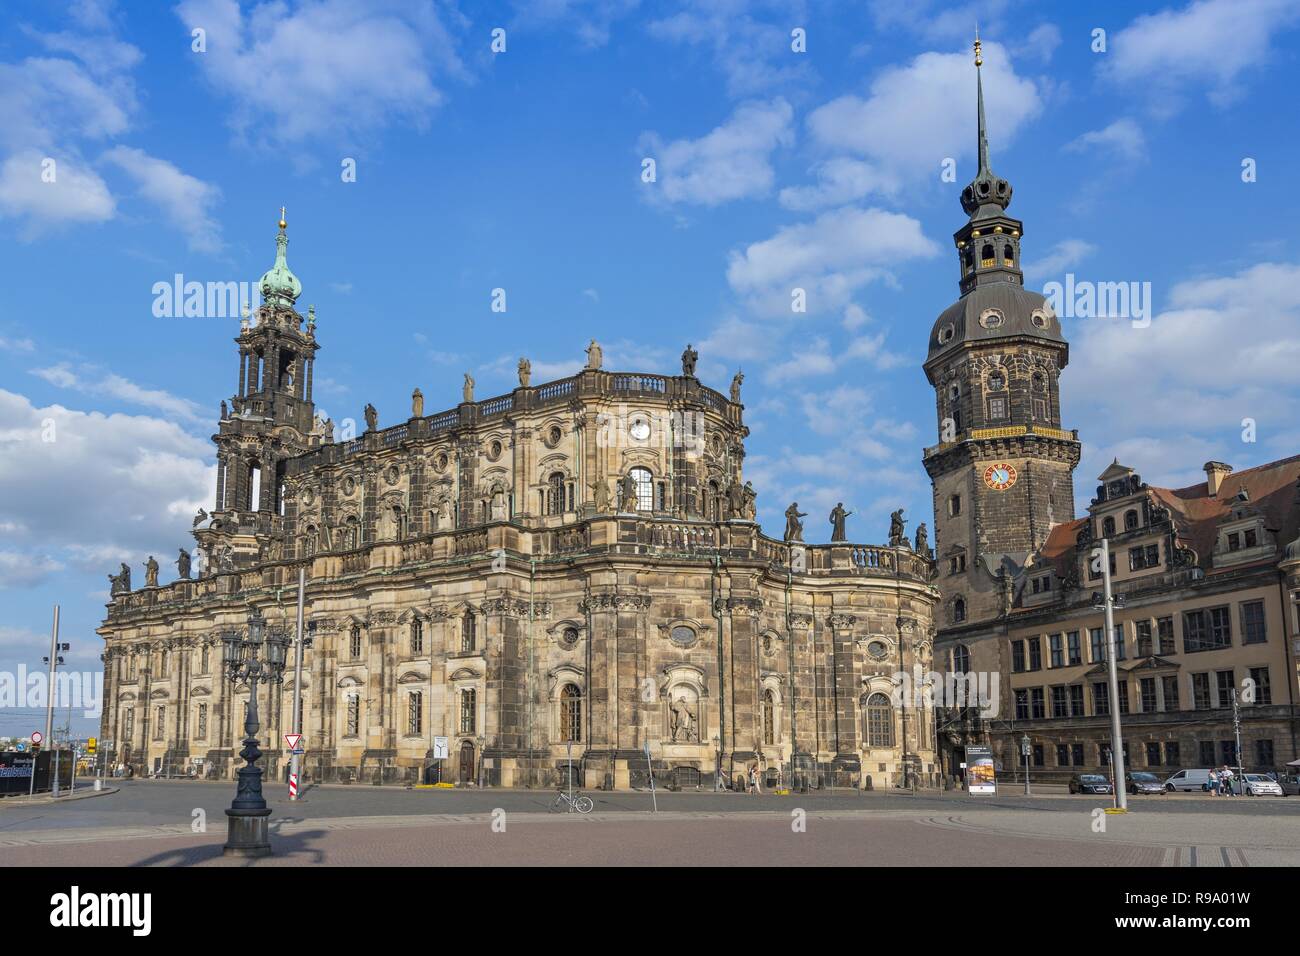 Cathedral of the Holy Trinity (Katholische Hofkirche) and Dresden castle, Germany. Stock Photo